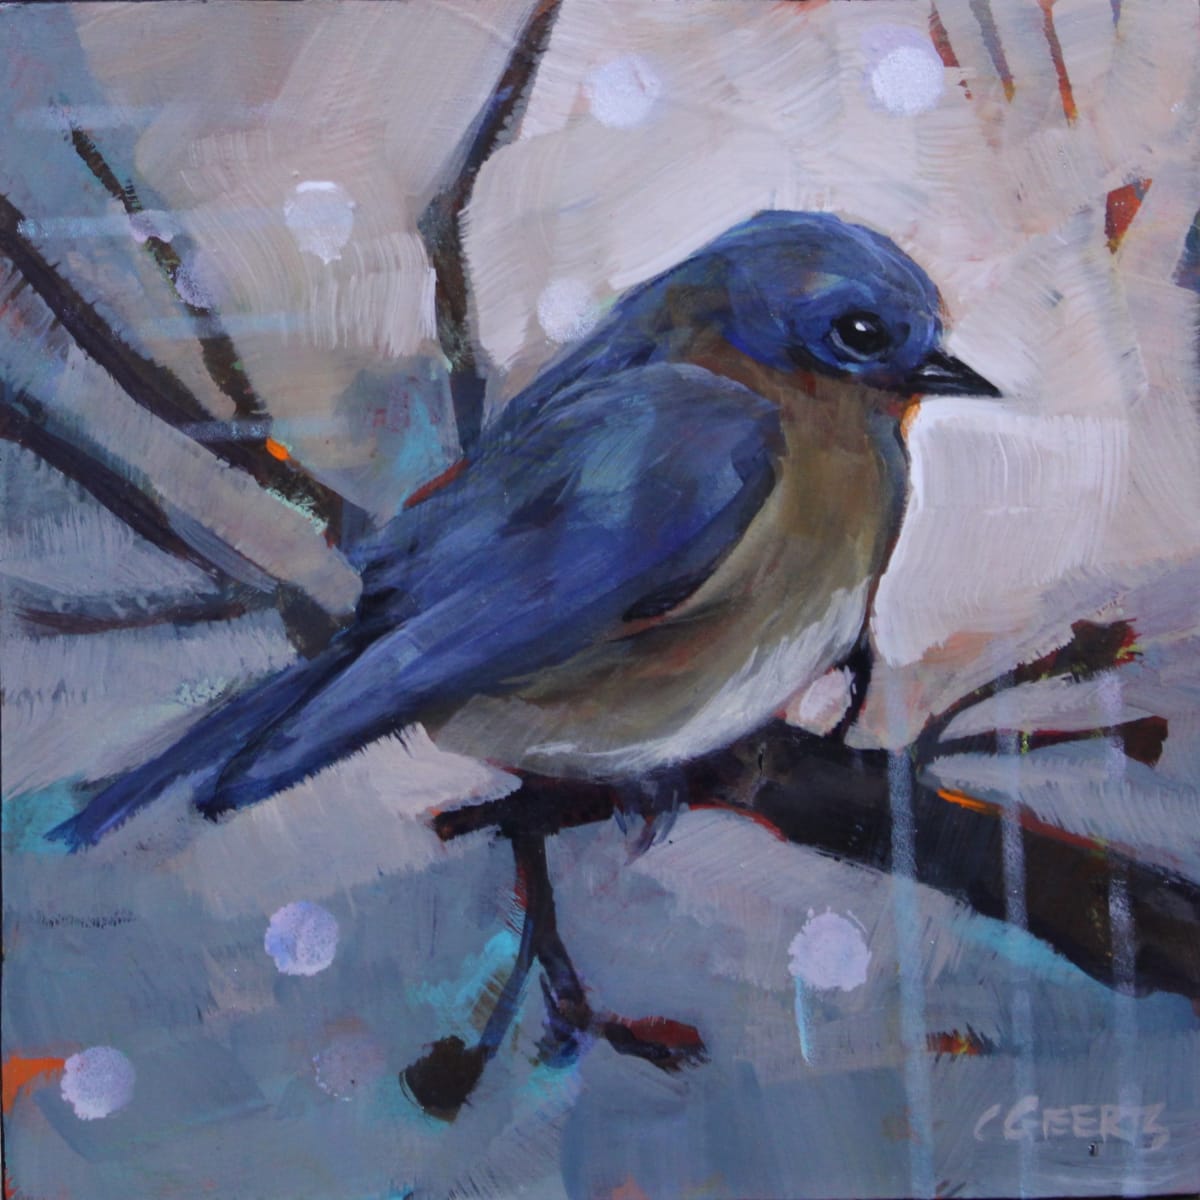 Chilly Bluebird by Connie Geerts 